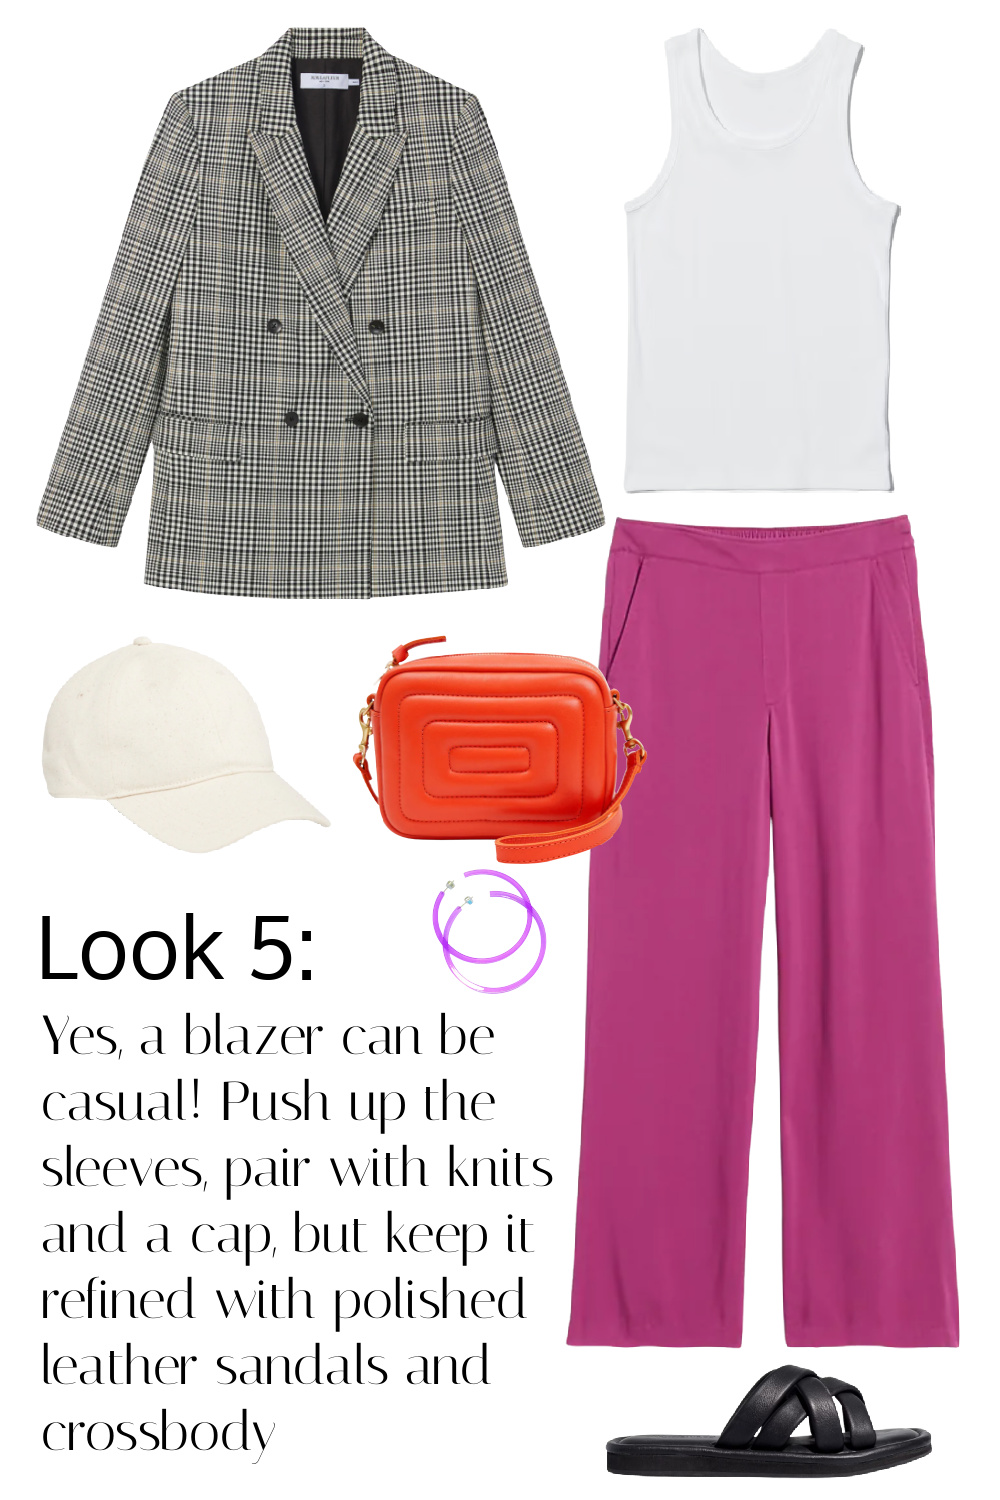 Look 5 styles the blazer with a white ribbed tank and magenta soft wide leg pants. Yes, a blazer can be casual! Push up the sleeves, pair with knits and a cap, but keep it refined with polished leather sandals and crossbody.